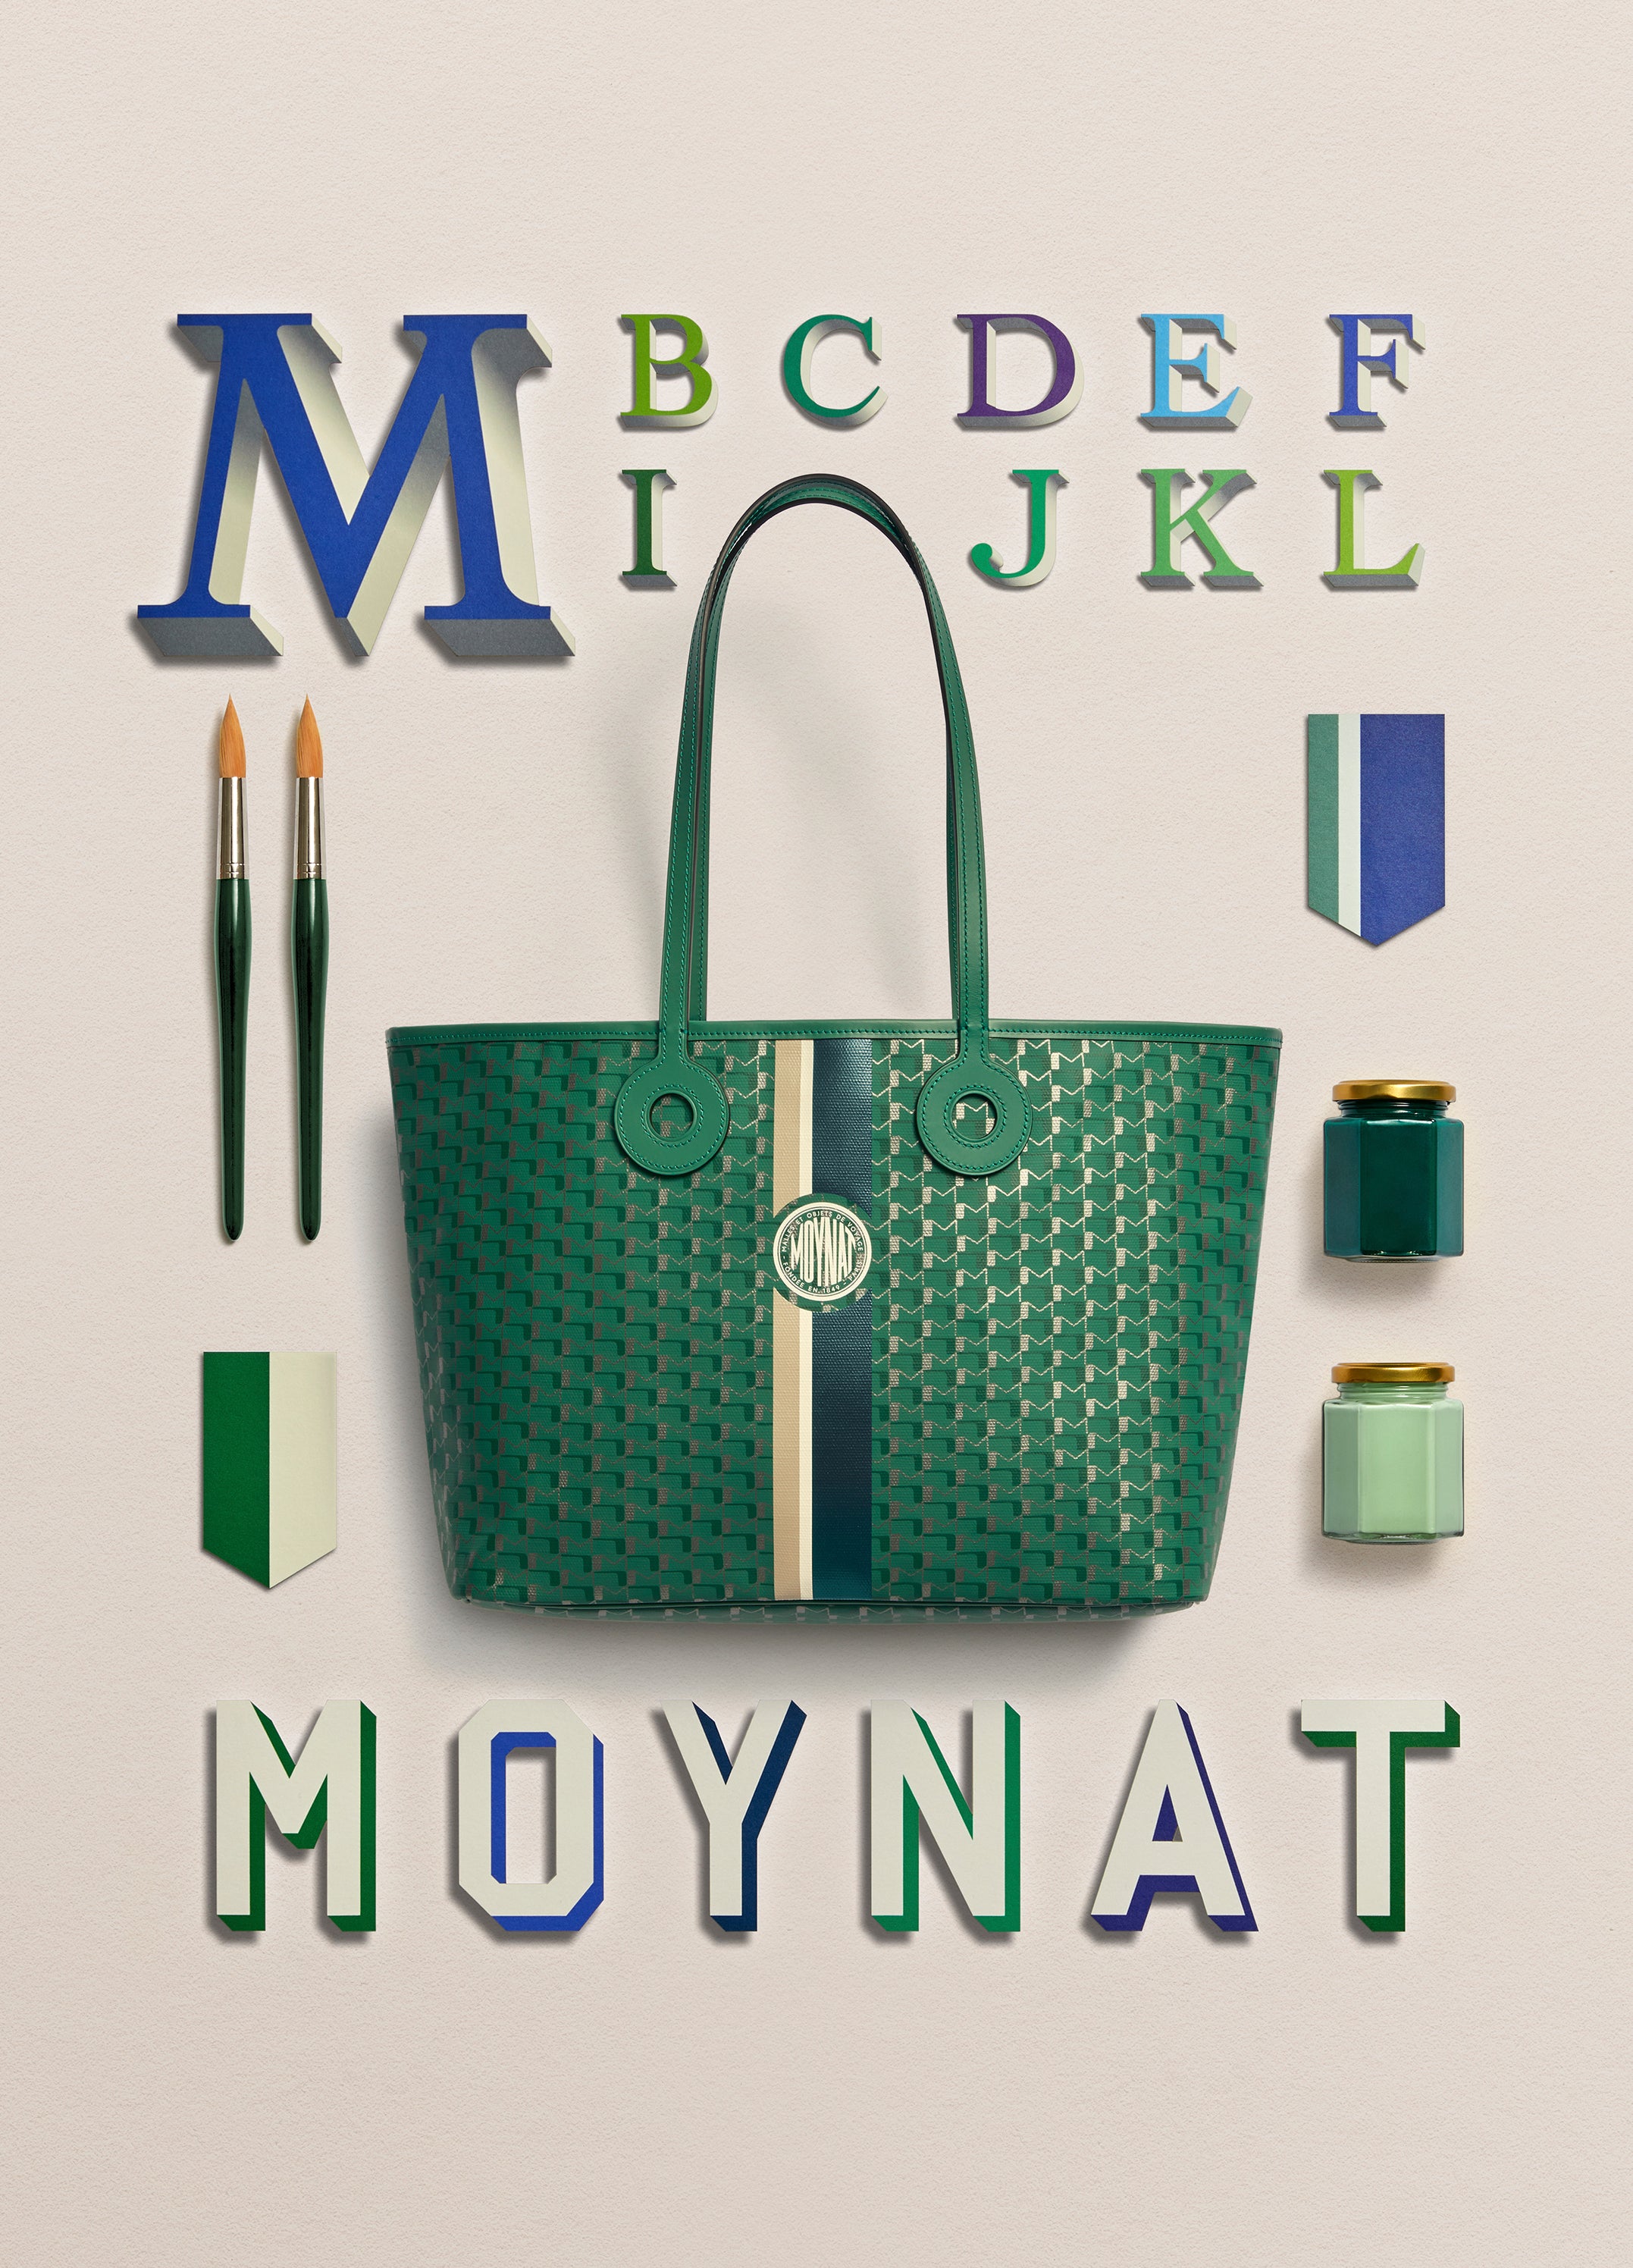 Download Get your hands on the exclusive Moynat Flori bag